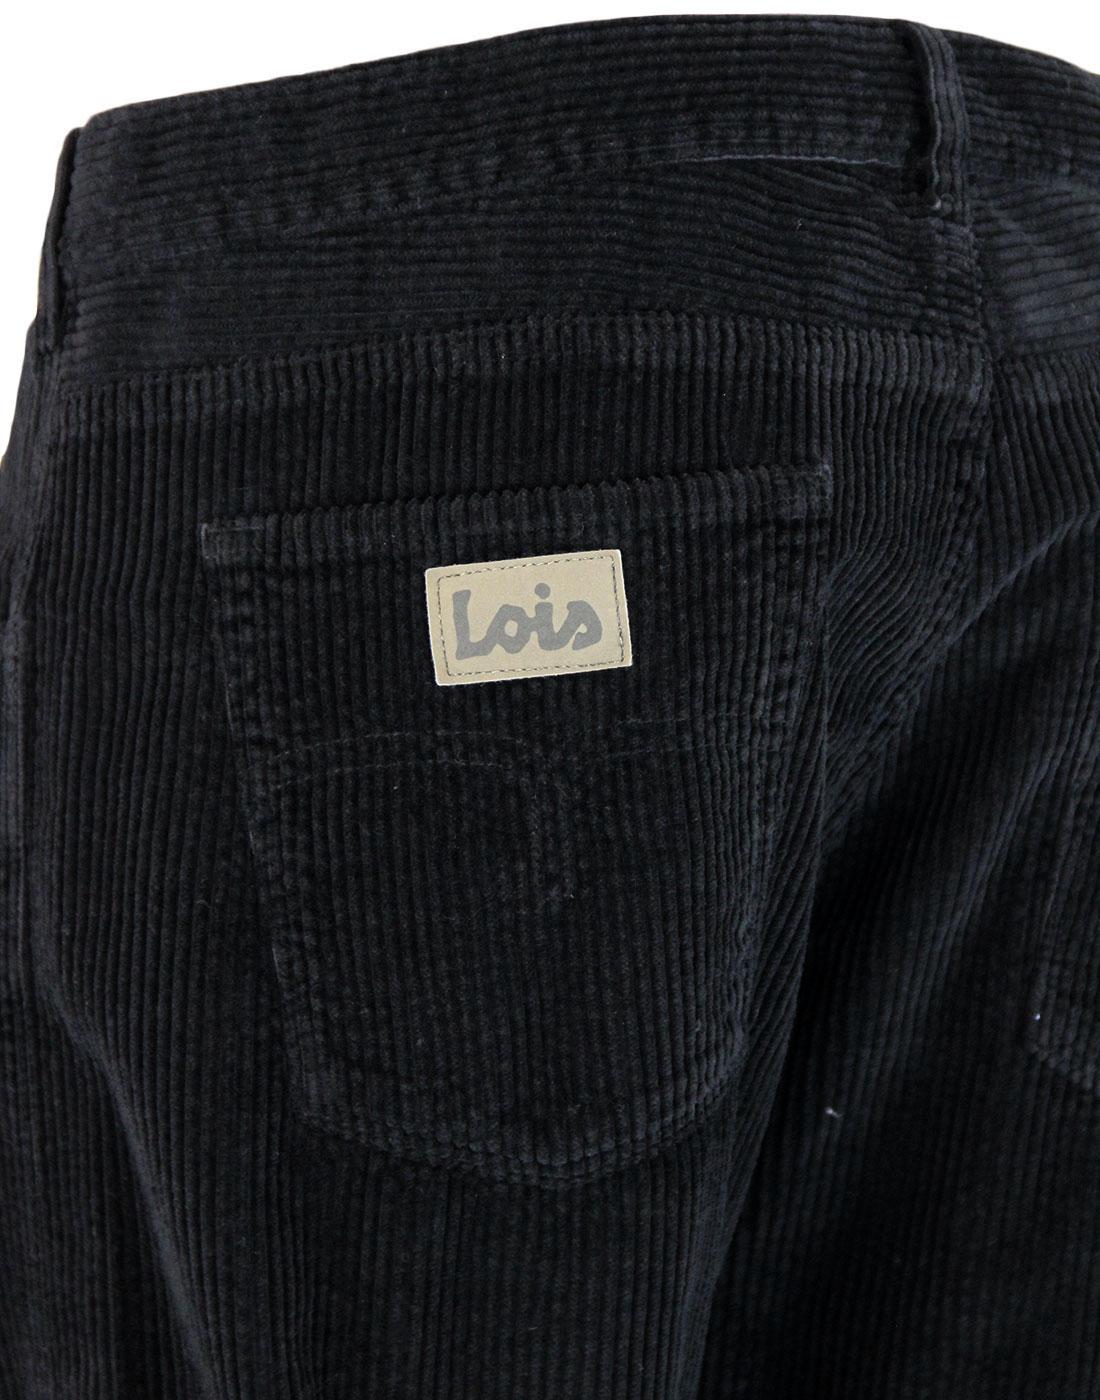 cult Spanish 80s brand casuals Lois Men's Sierra Needle Cords in Charcoal 